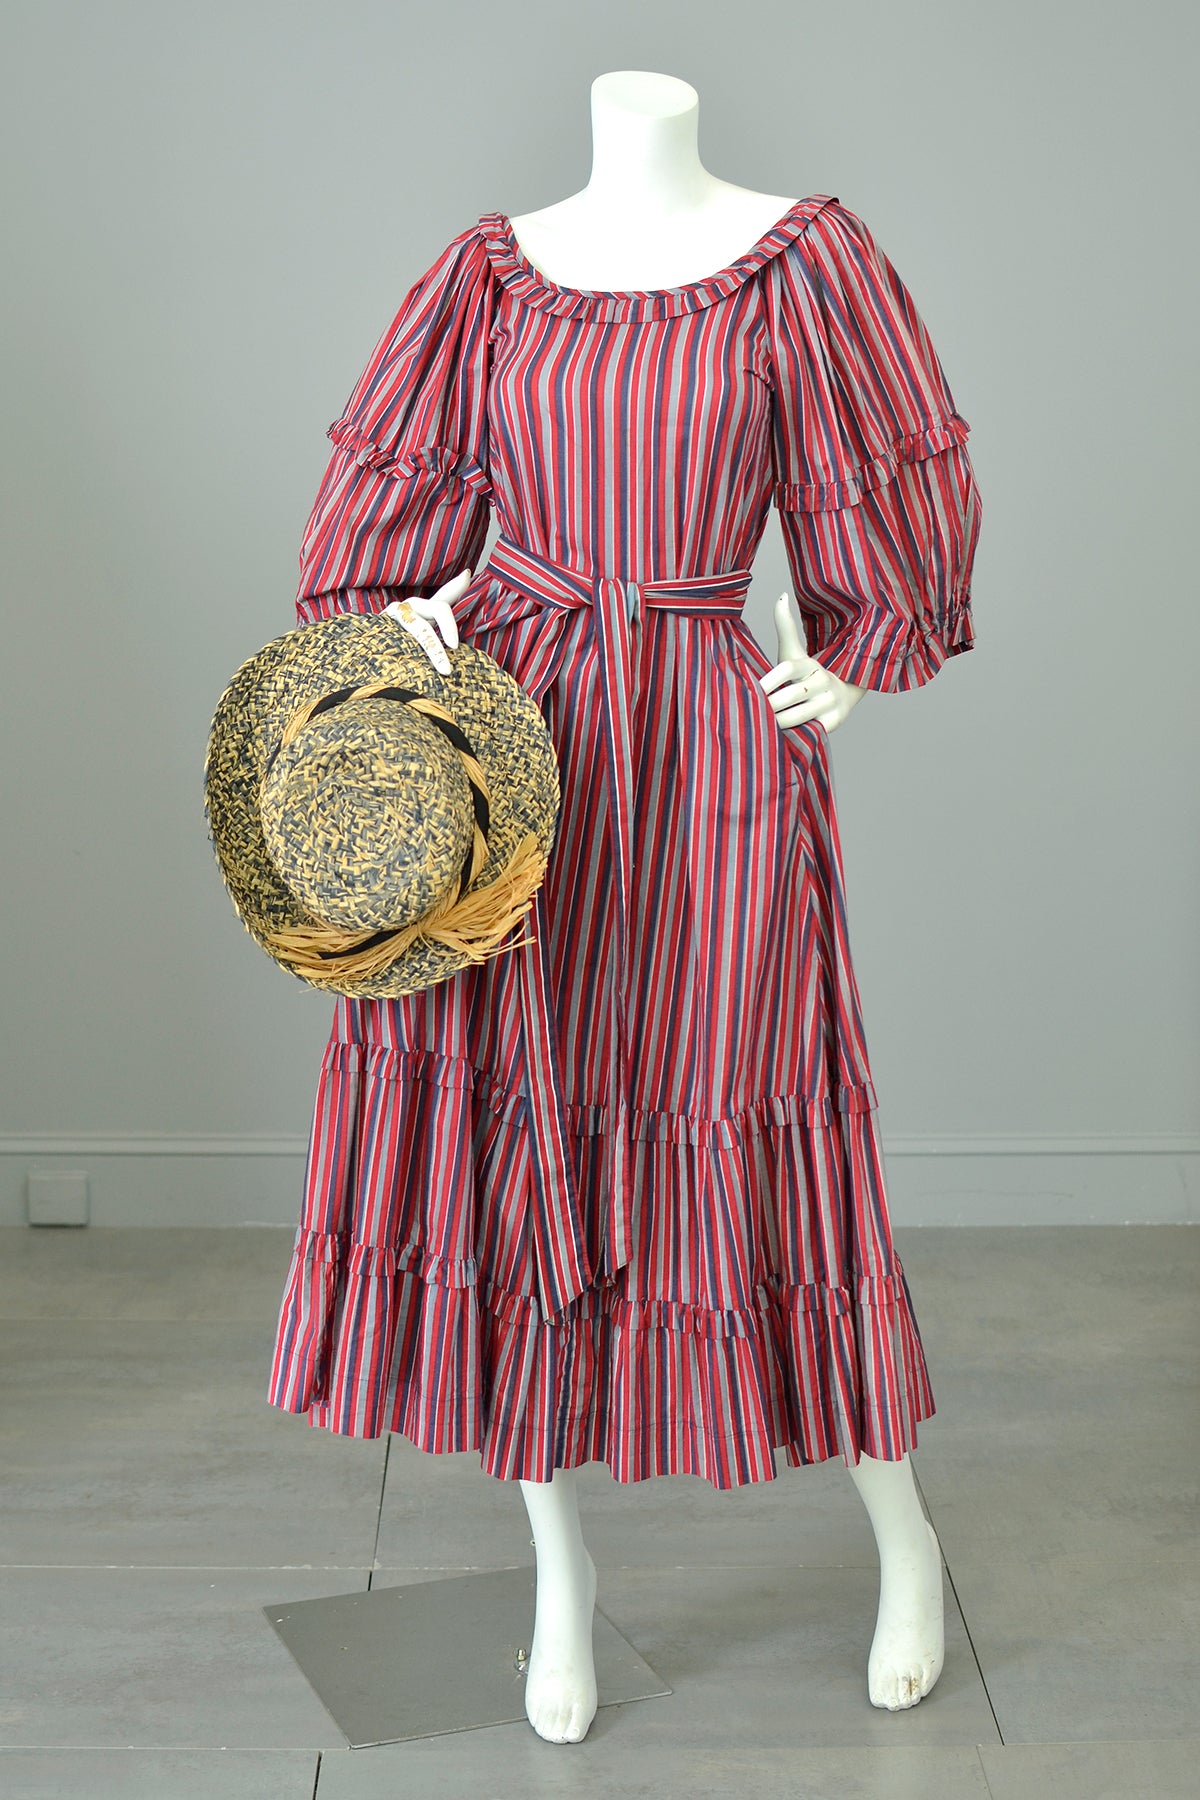 1980s Striped Cotton Peasant Dress with Puffy Bell Sleeves and Tiered Skirt by Laura Ashley